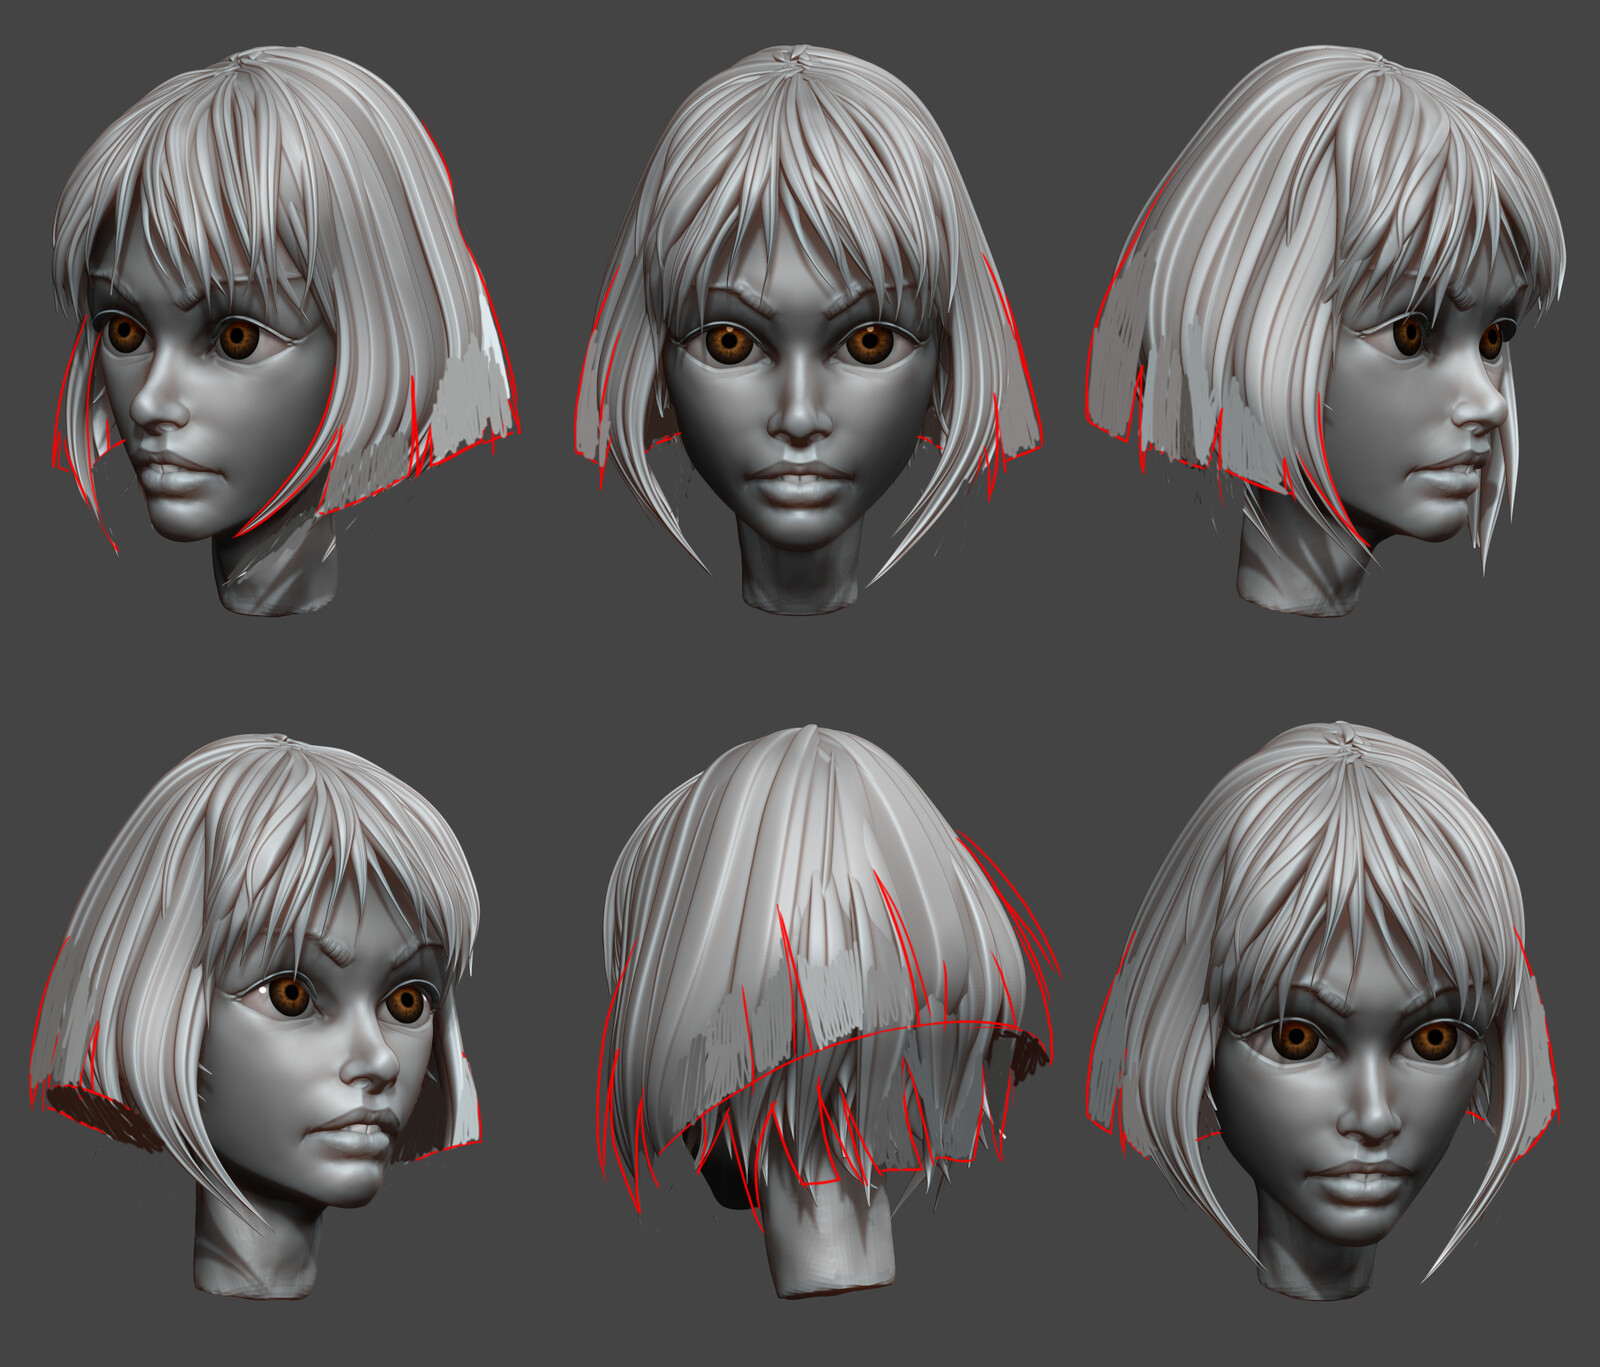 Superfast sketches for improving head and hair volume.